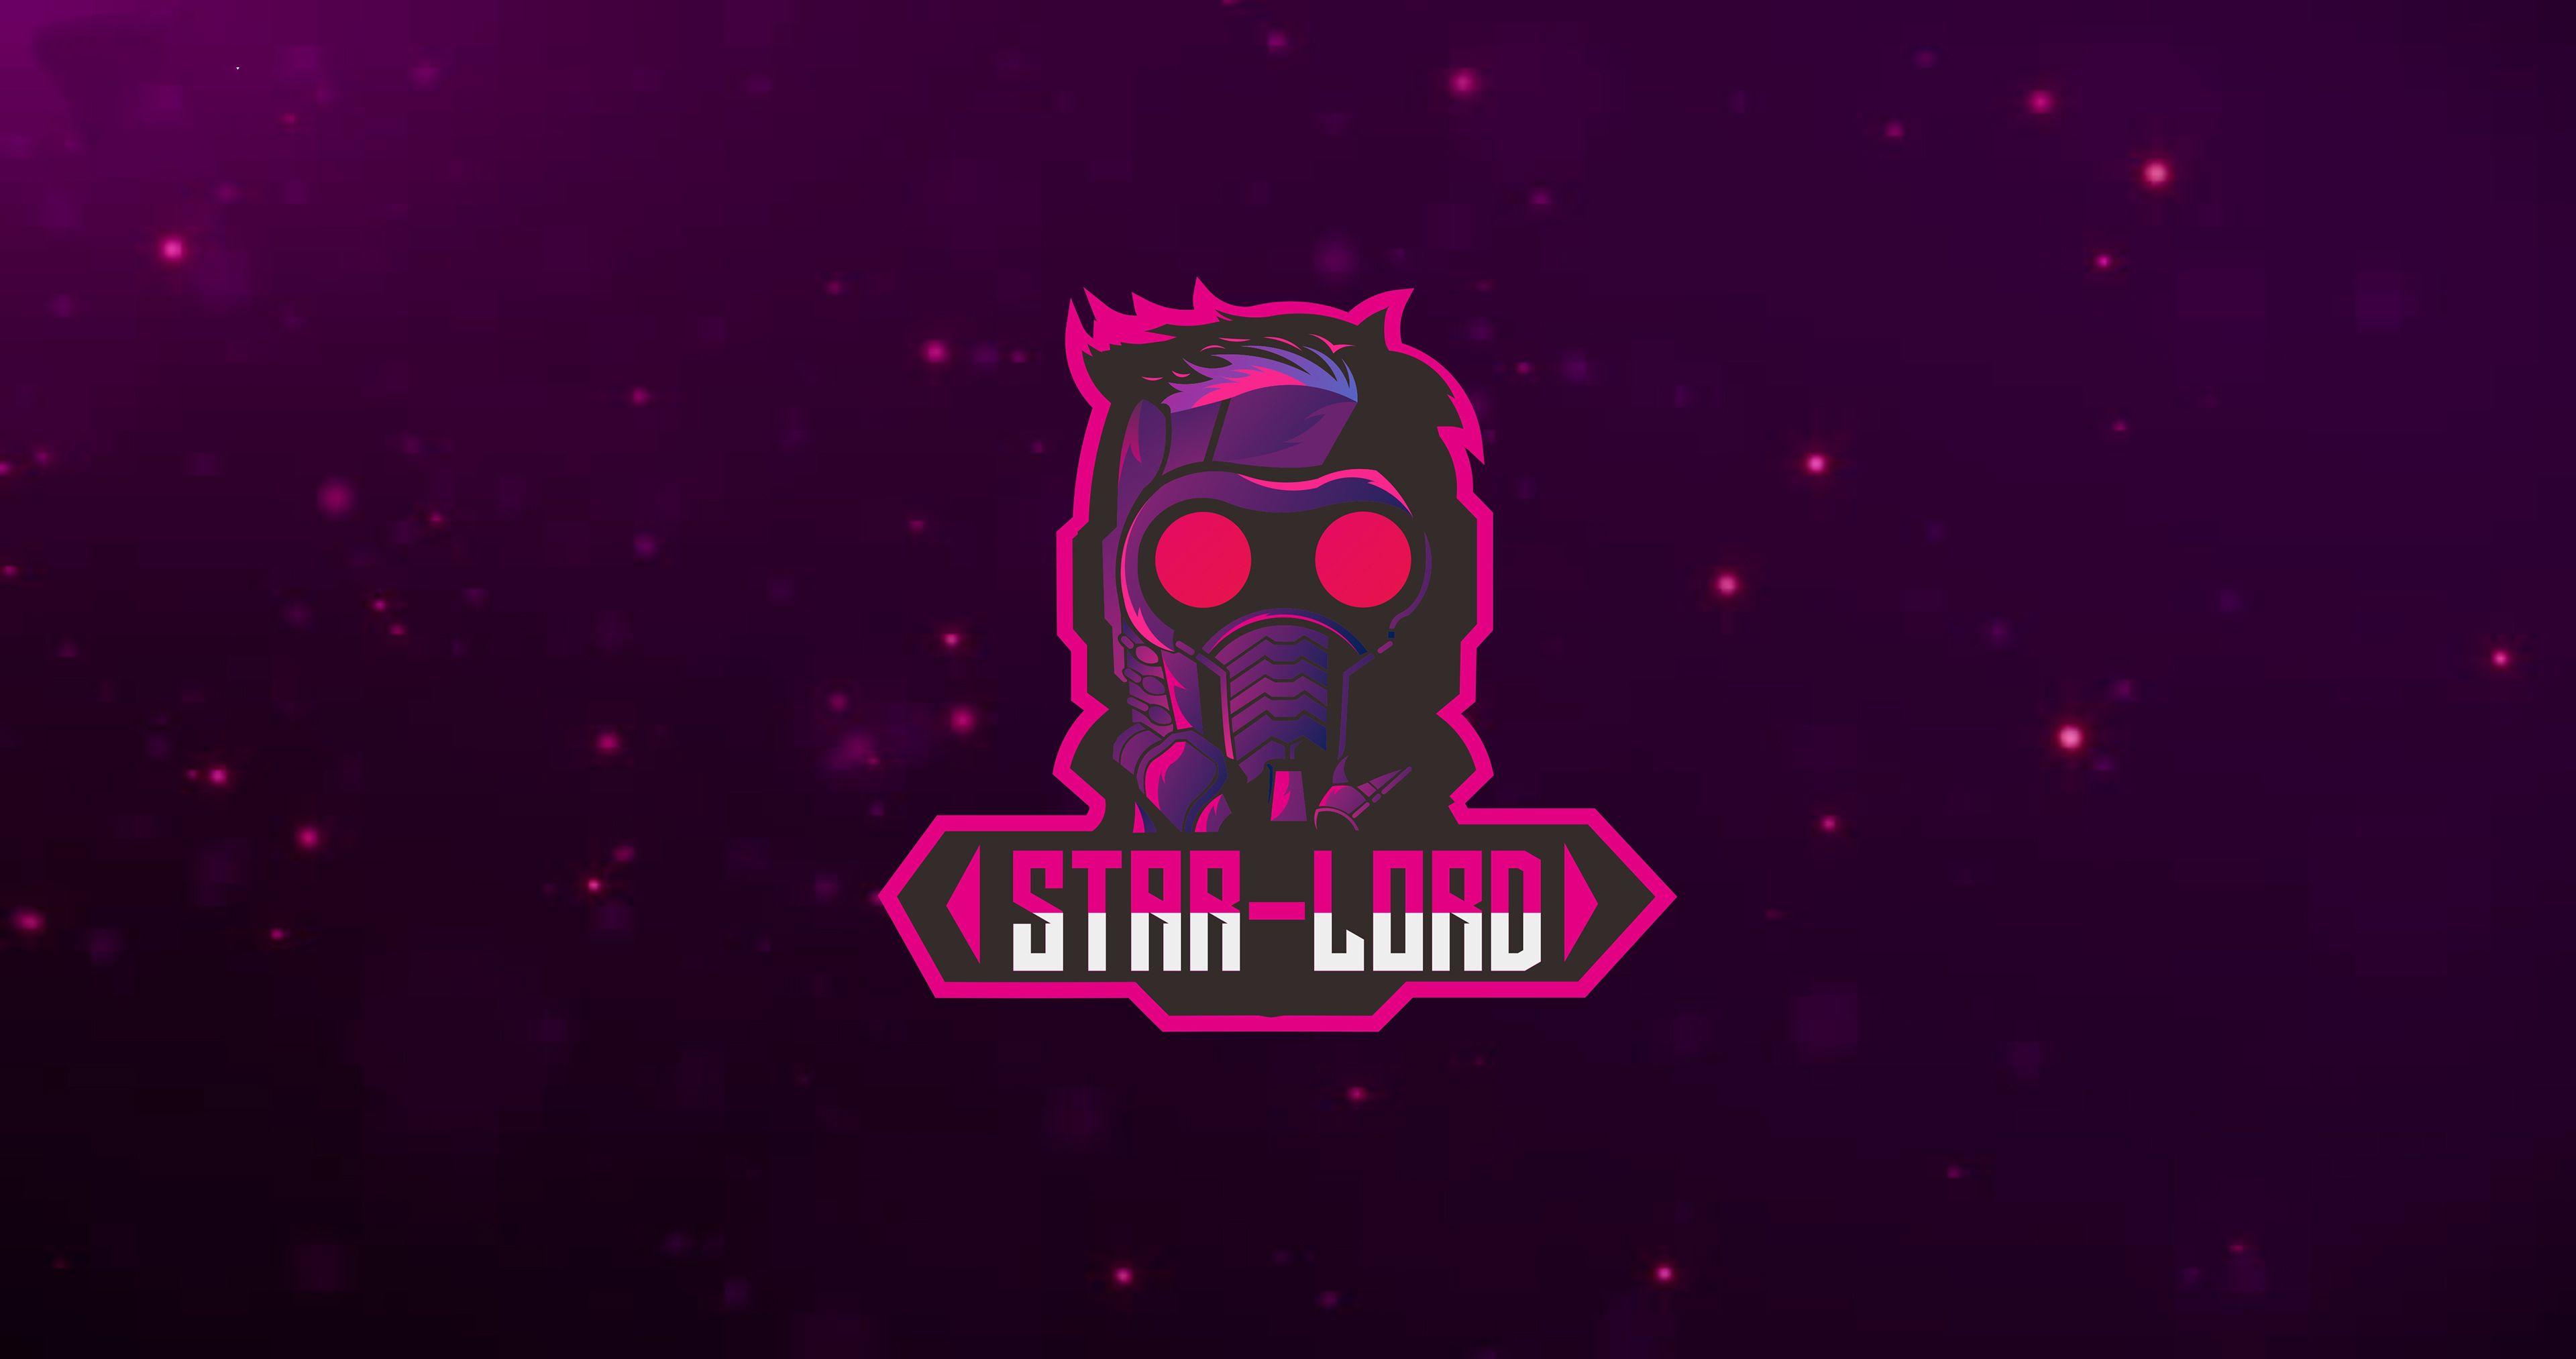 Lord Logo - Star Lord Logo, HD Superheroes, 4k Wallpapers, Images, Backgrounds ...